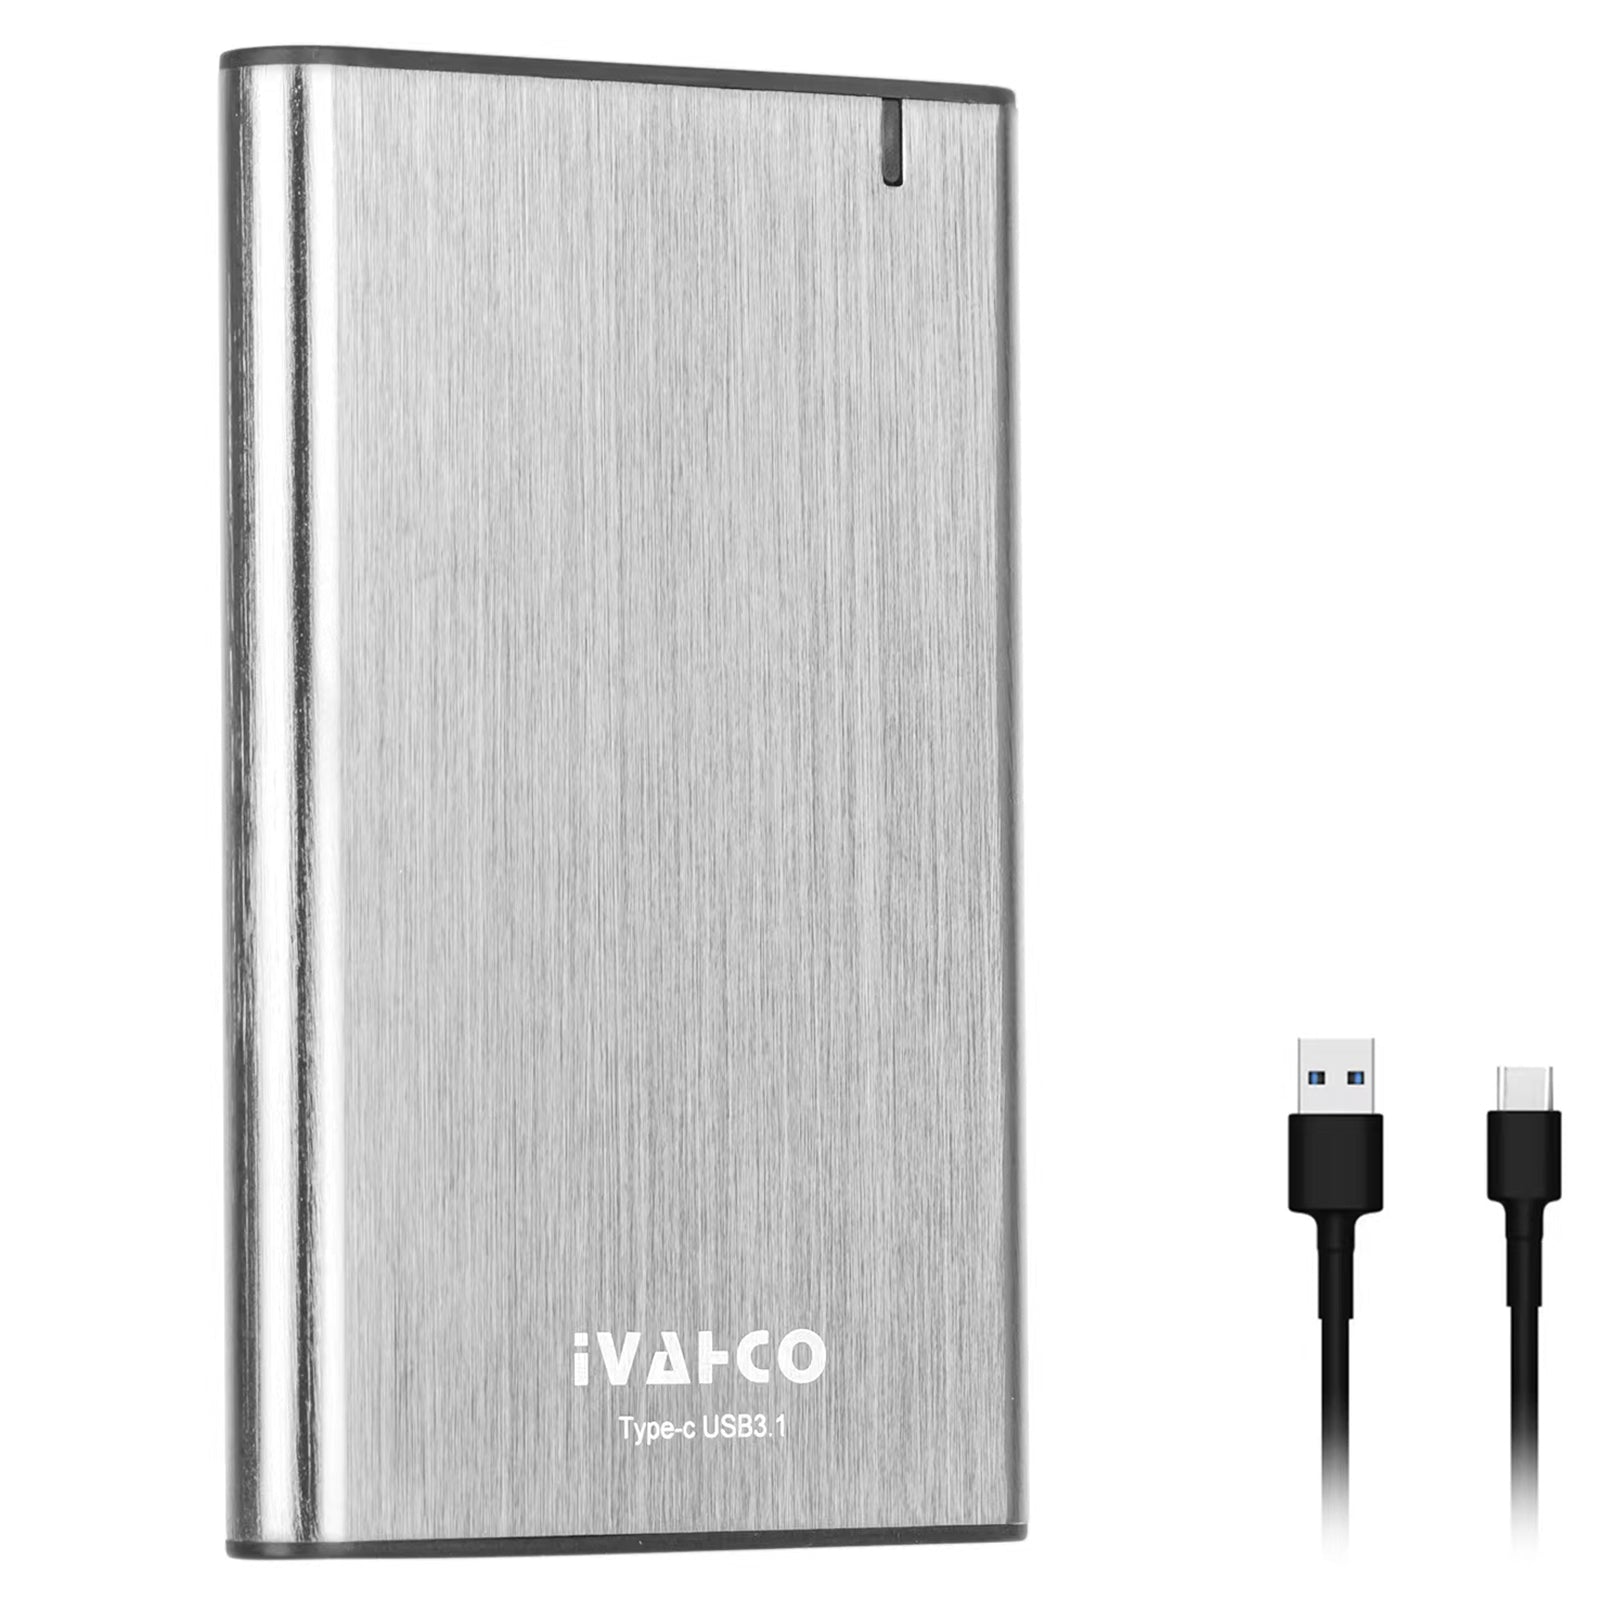 IVAHCO 320GB Type-C USB3.1 Solid State Drive Enclosure Brushed Metal 2.5" HDD External Case - Silver